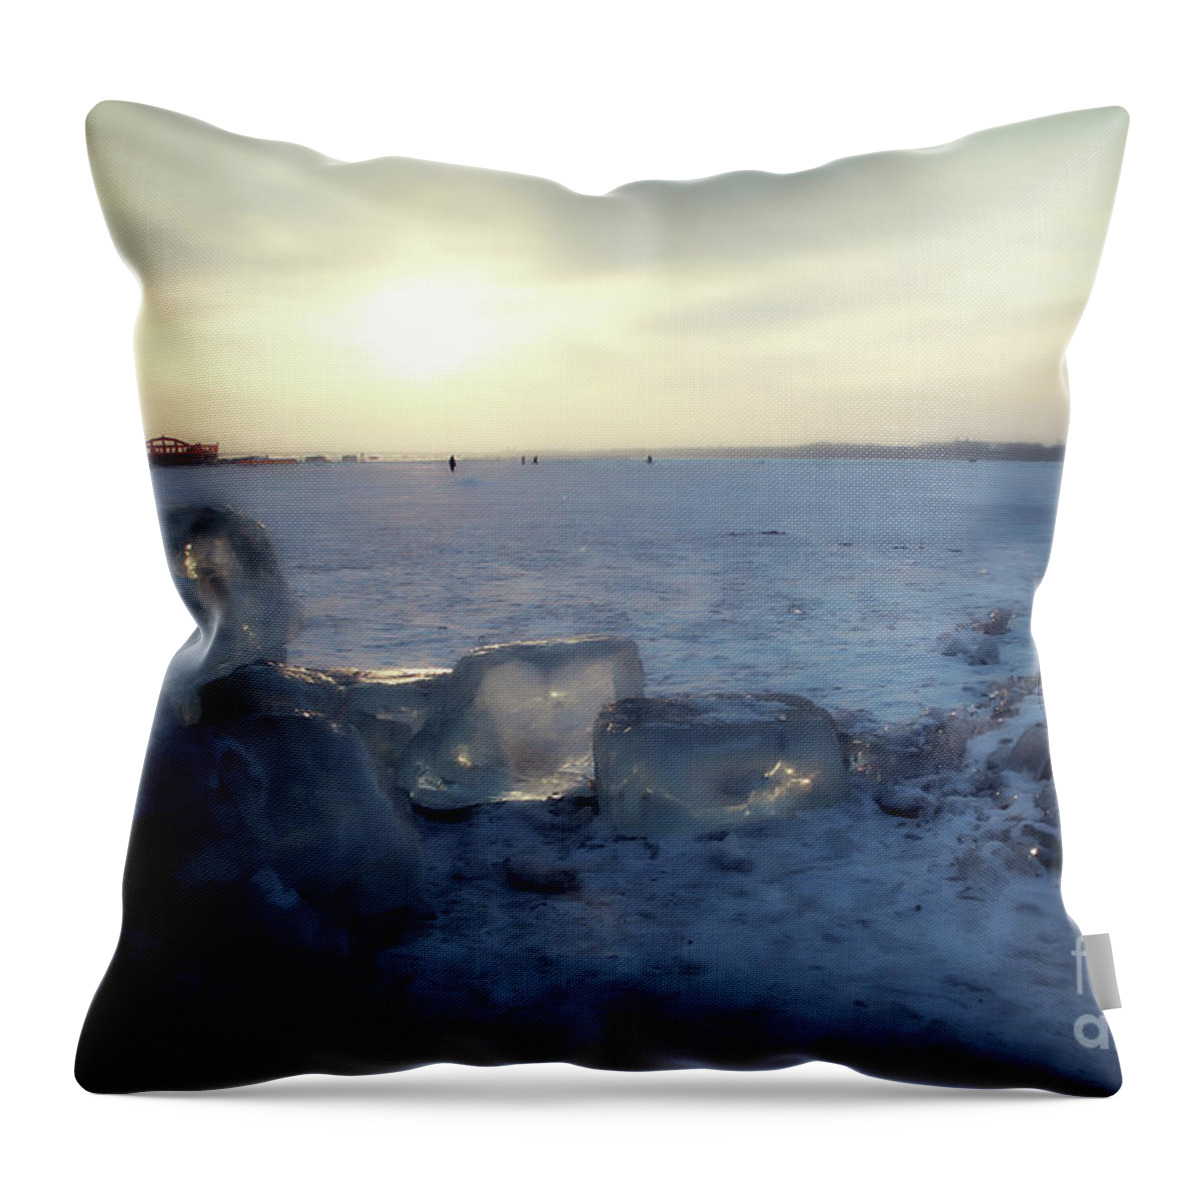 China Throw Pillow featuring the photograph Discovering China #11 by Marisol VB